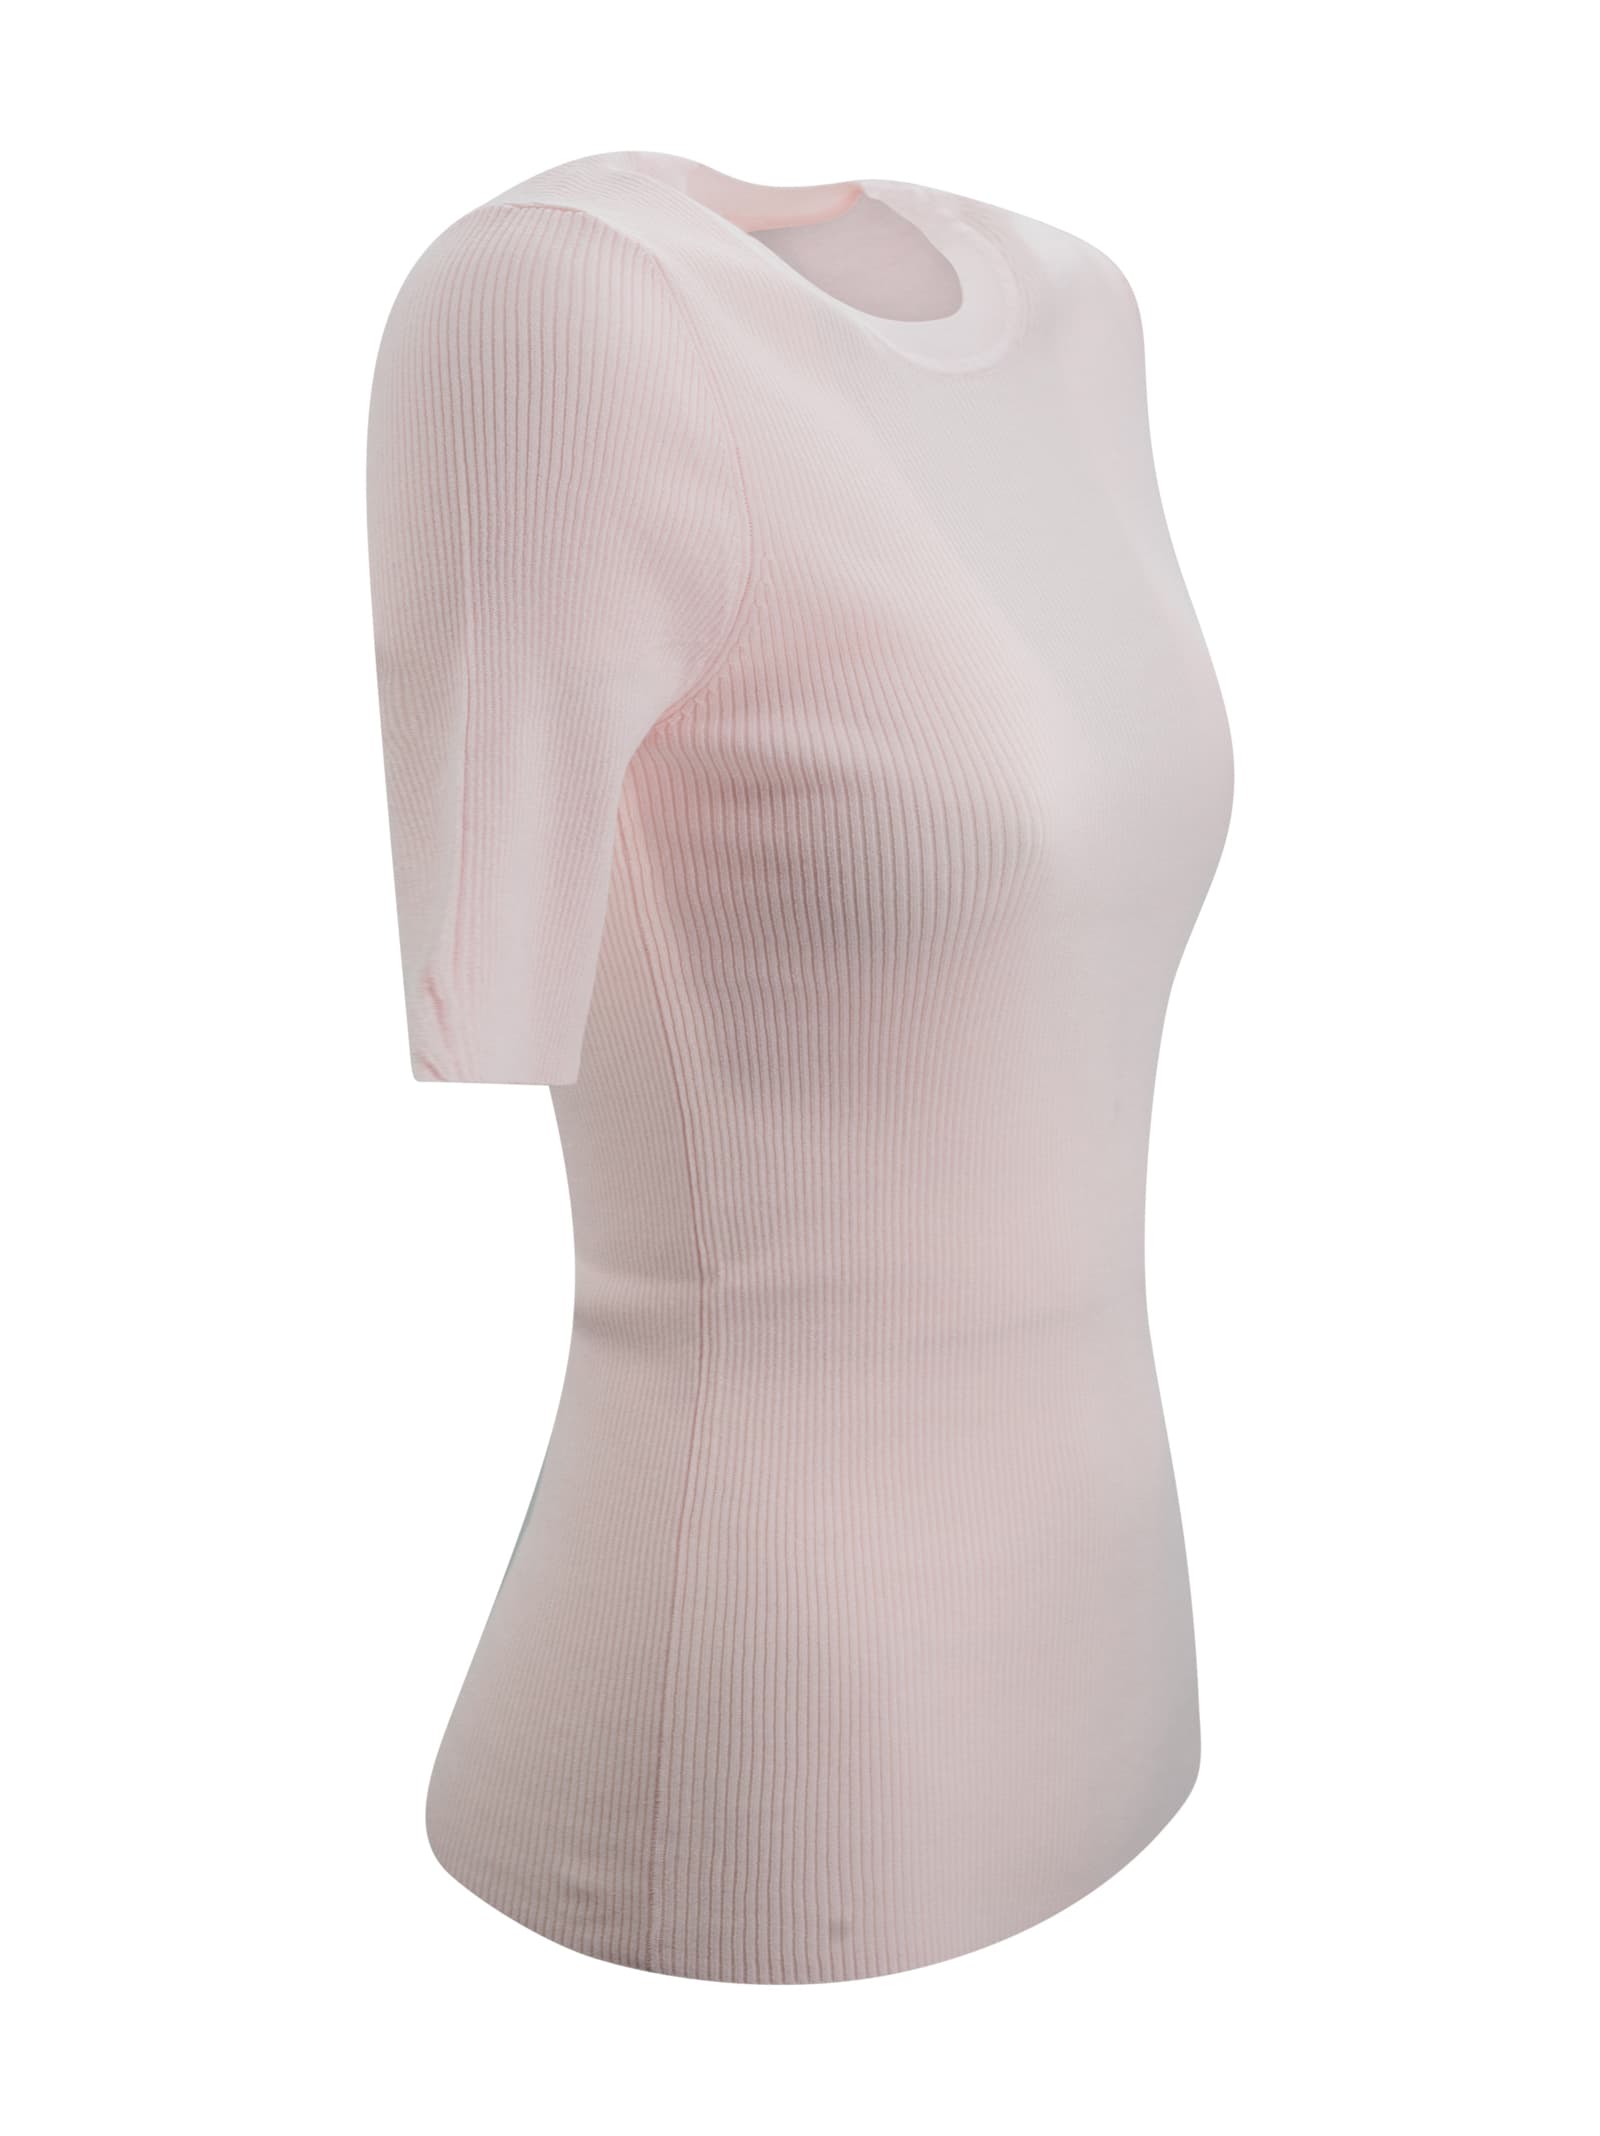 Shop P.a.r.o.s.h Ribbed-knit Top In Pink